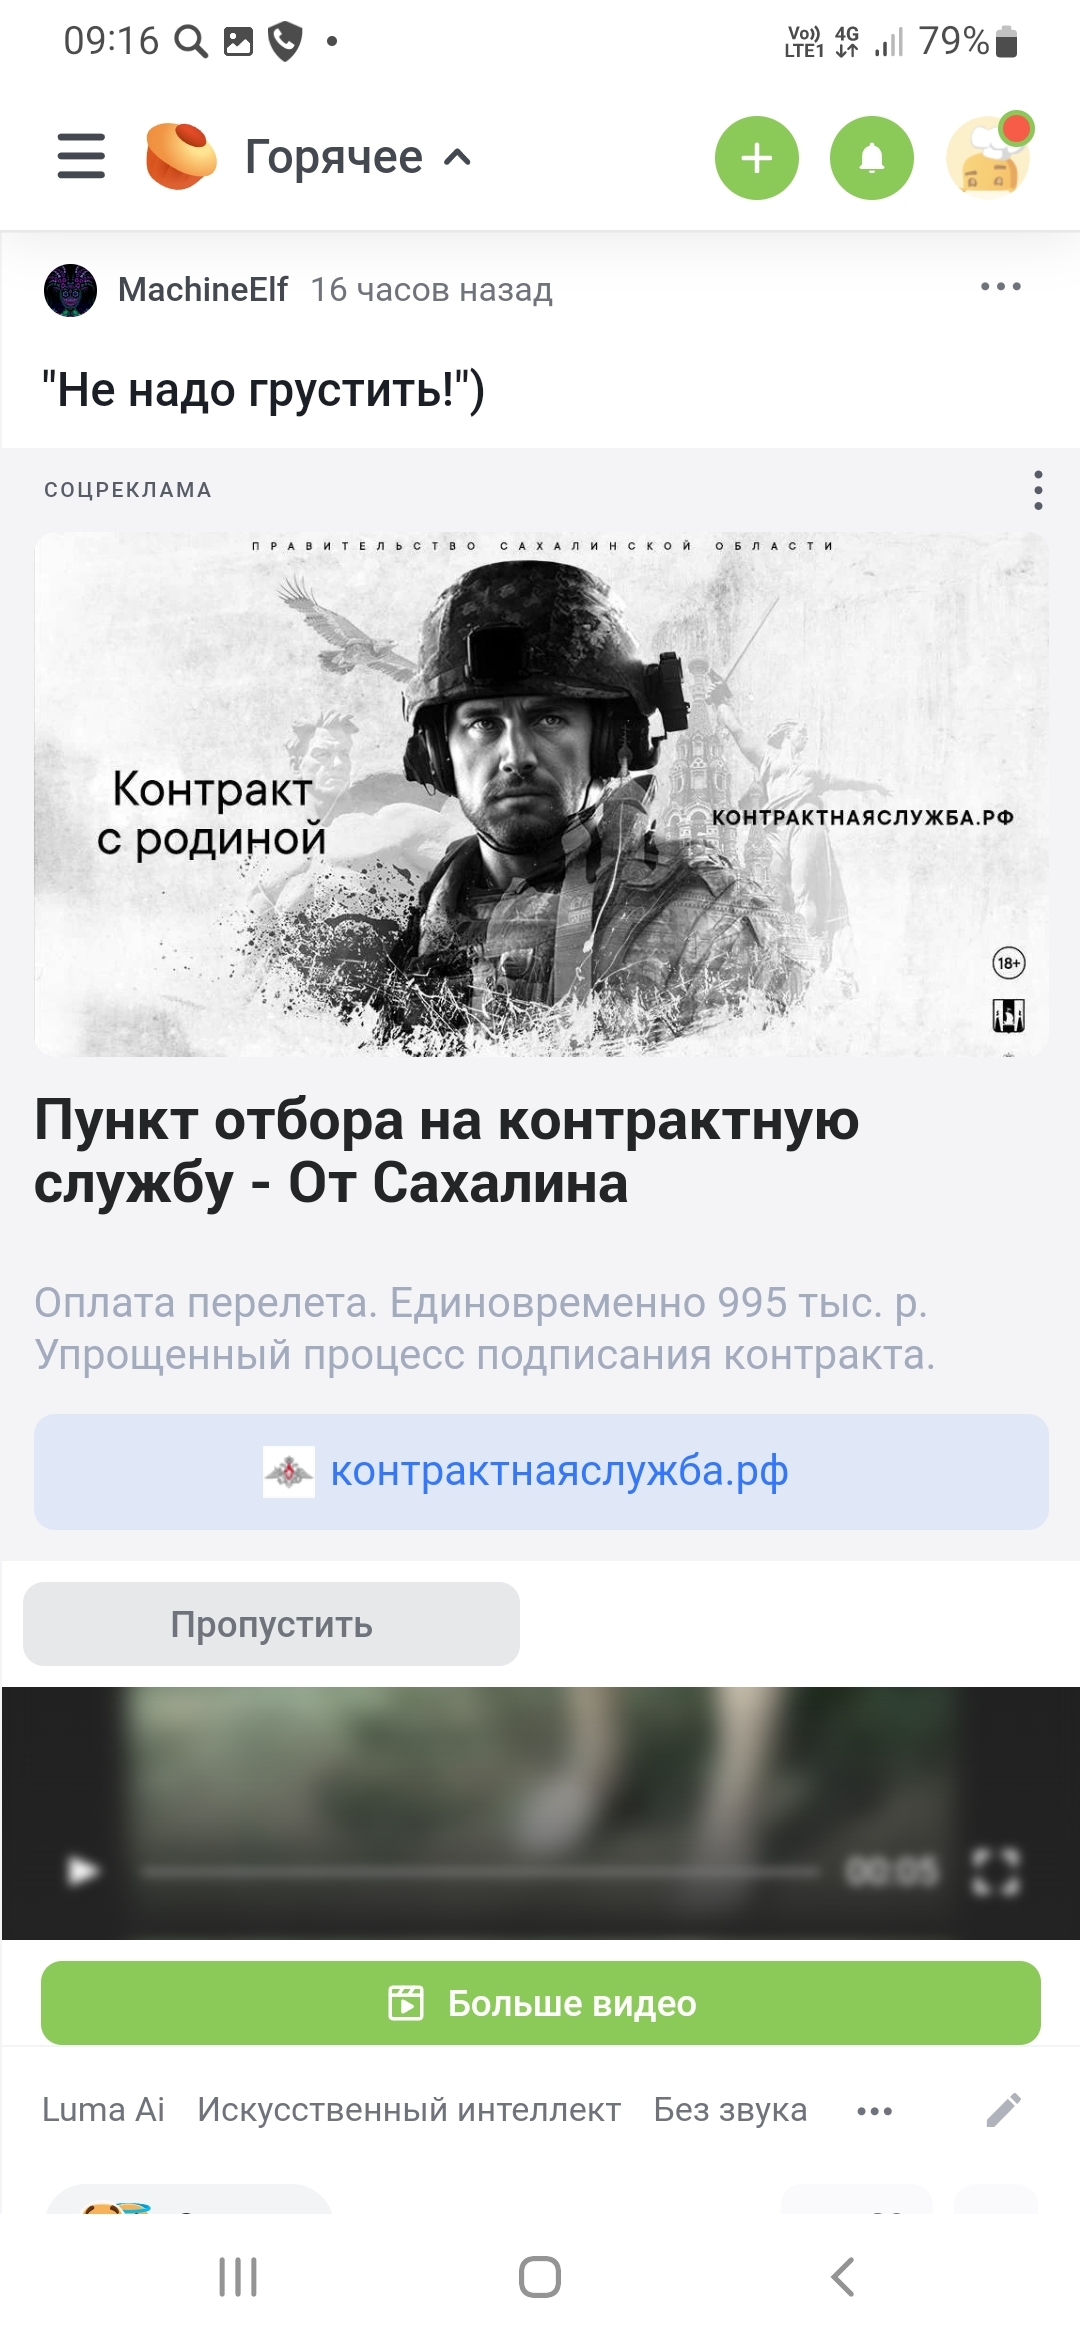 Will it really help? - Peekaboo, Advertising, Ministry of Defence, Sakhalin, Contract service, Longpost, Screenshot